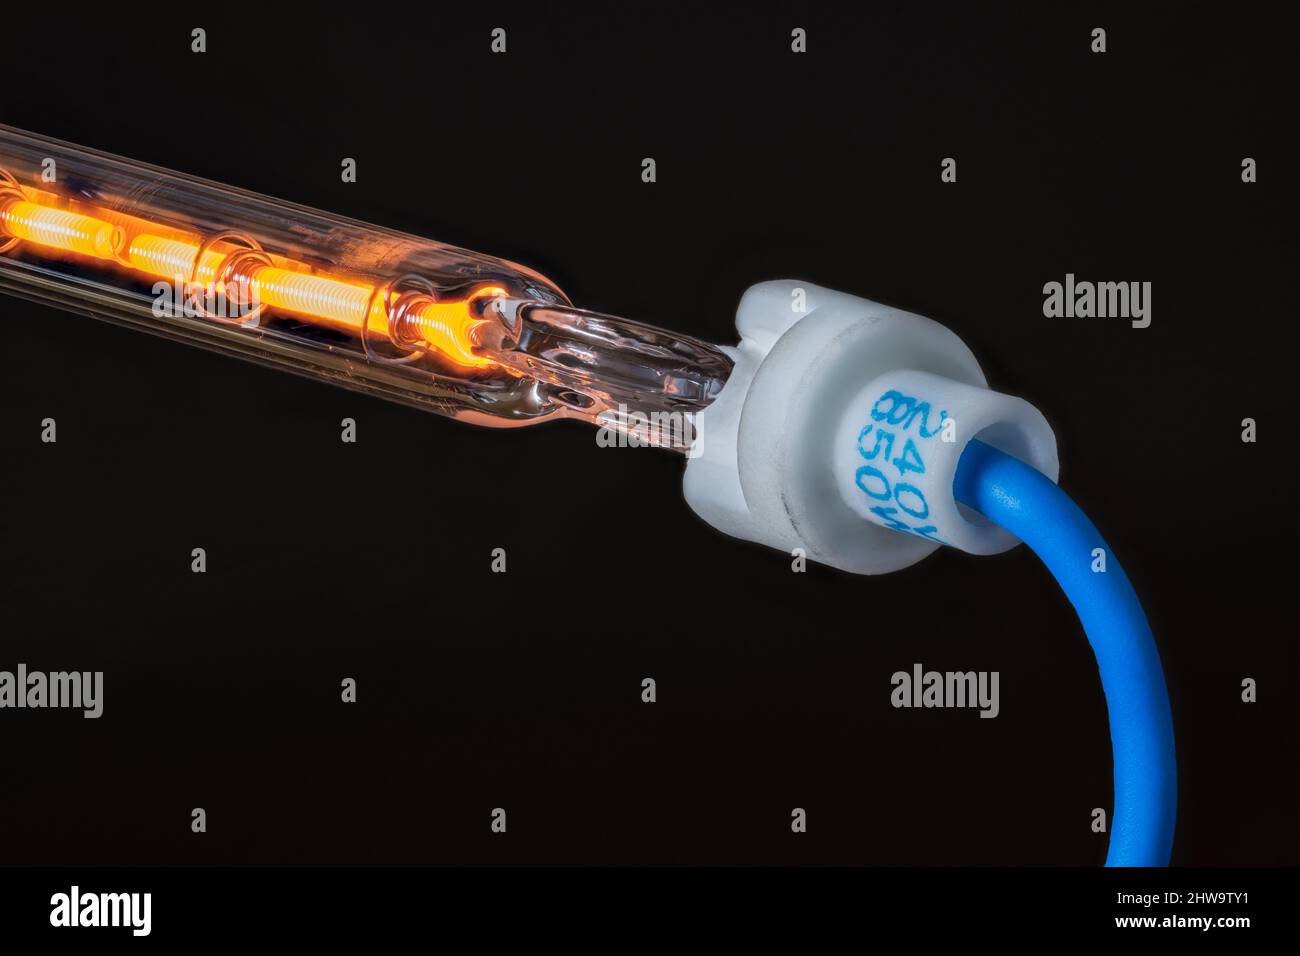 Detail of hot resistance wire in hollow glass tube with blue cable on a black background. Flow of electrical current through coiled metal conductor. Stock Photo